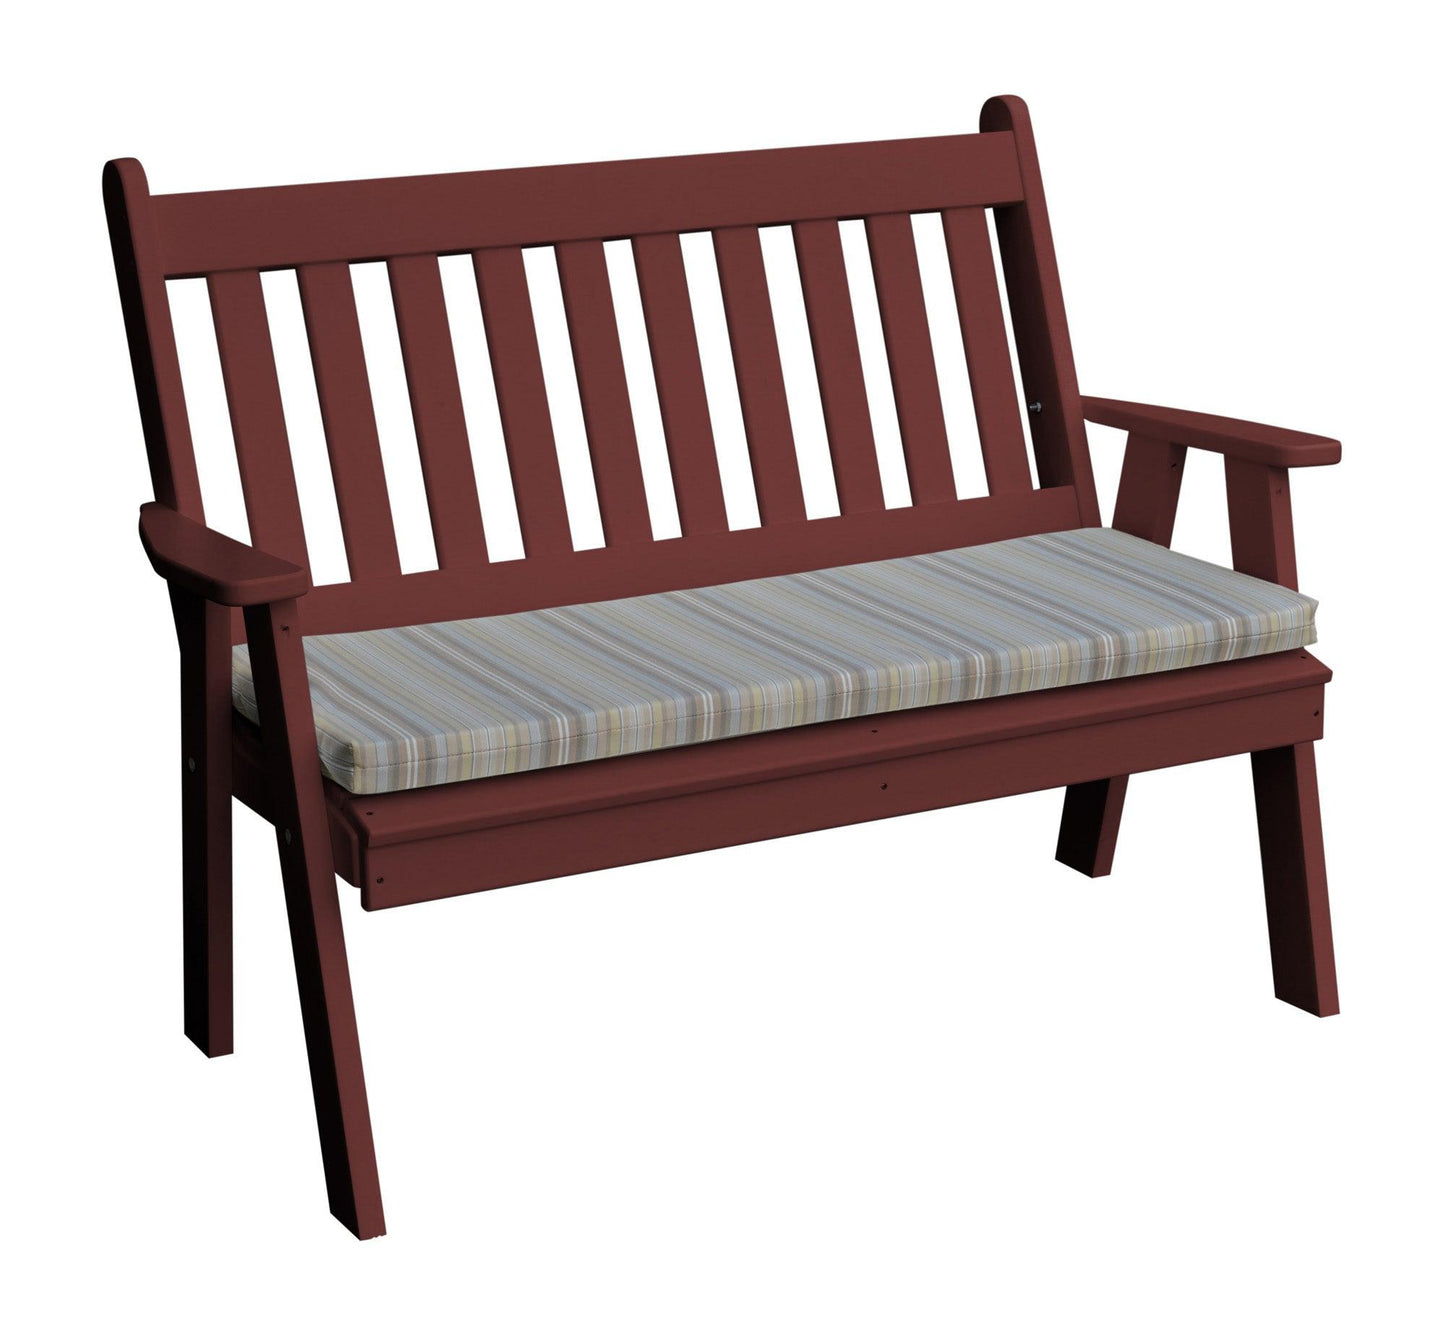 A&L Furniture Company Recycled Plastic 5' Traditional English Garden Bench - LEAD TIME TO SHIP 10 BUSINESS DAYS